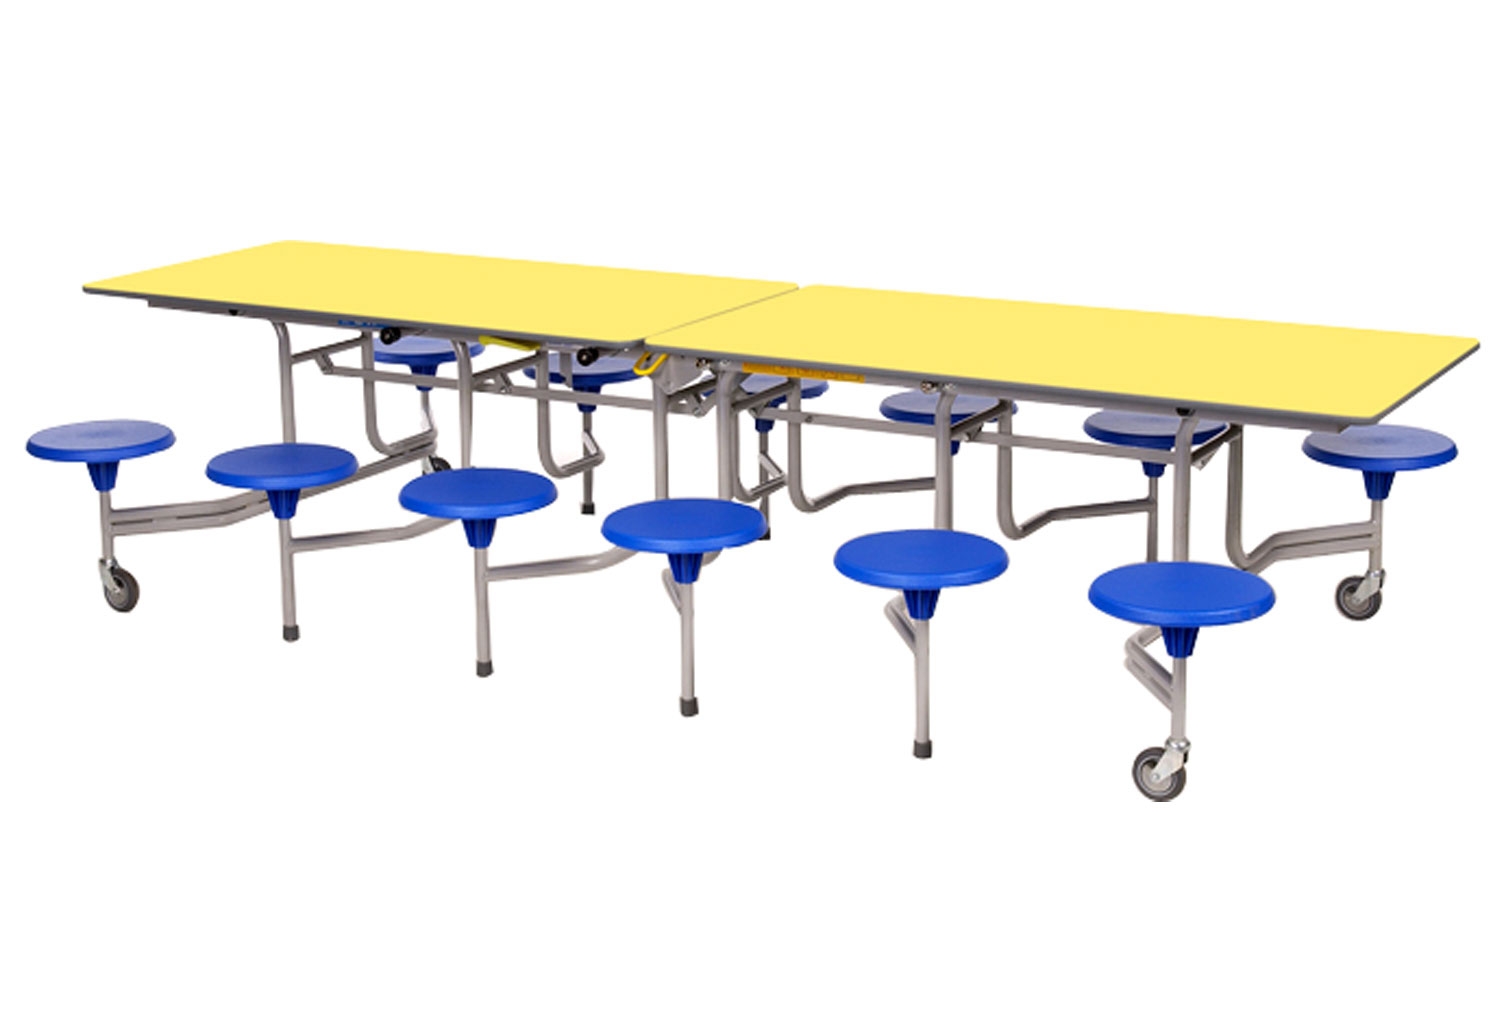 Sico Rectangular Table Seating Unit With 12 Seats, 69 (cm), Graphite Top, Blue Seats